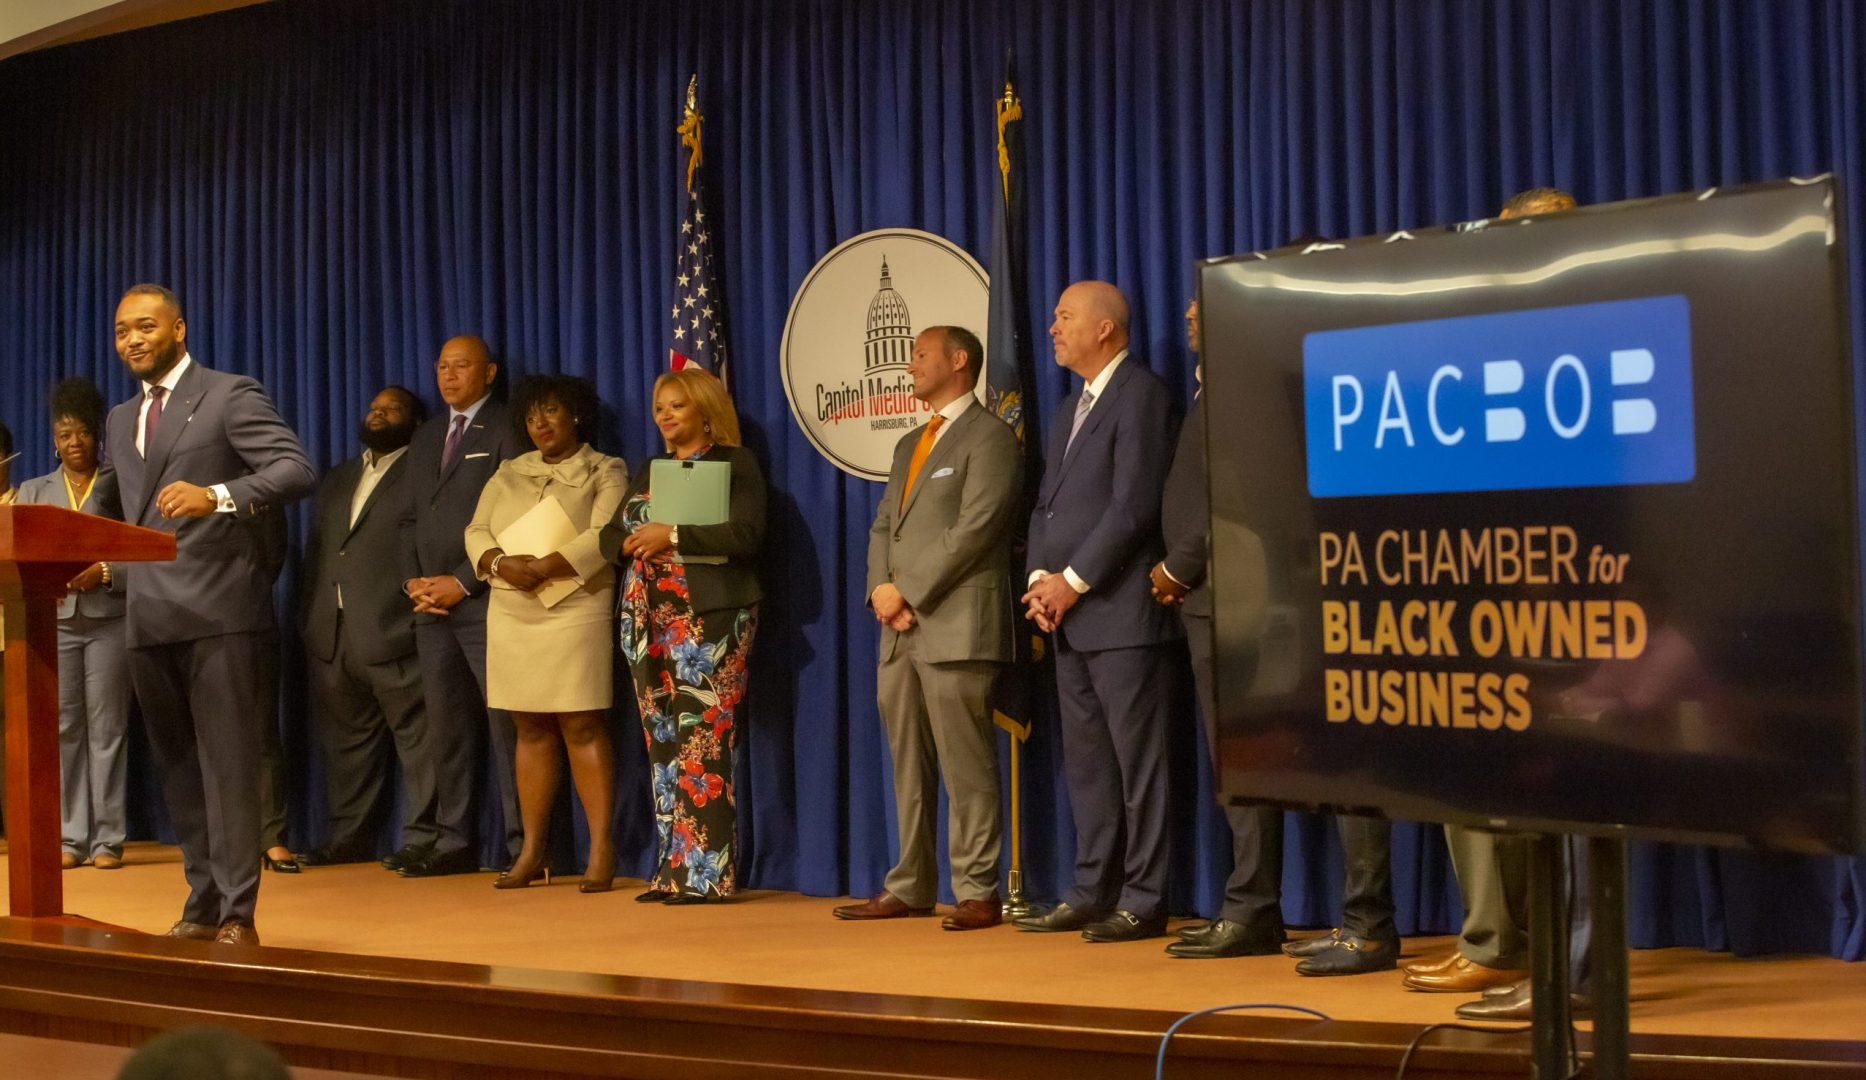 Business leaders and elected officials gather for PACBOB's soft launch at the Pennsylvania State Capitol.